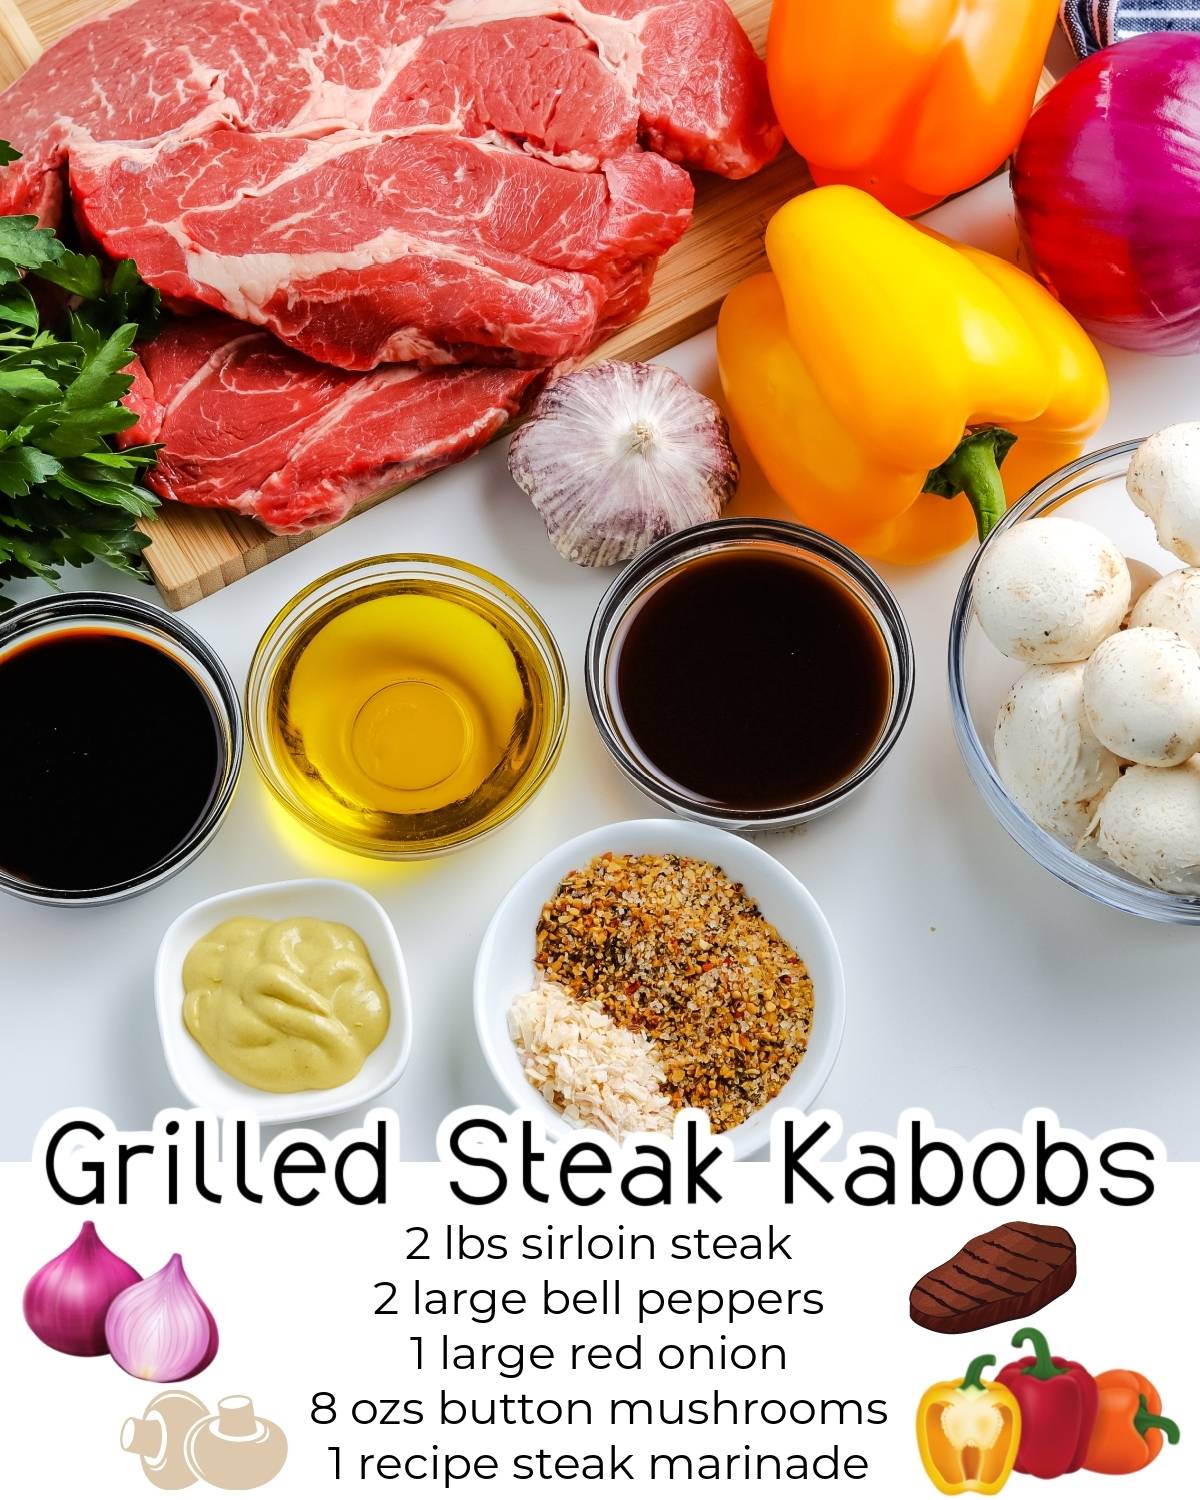 All of the ingredients needed to make these Grilled Steak Kabobs